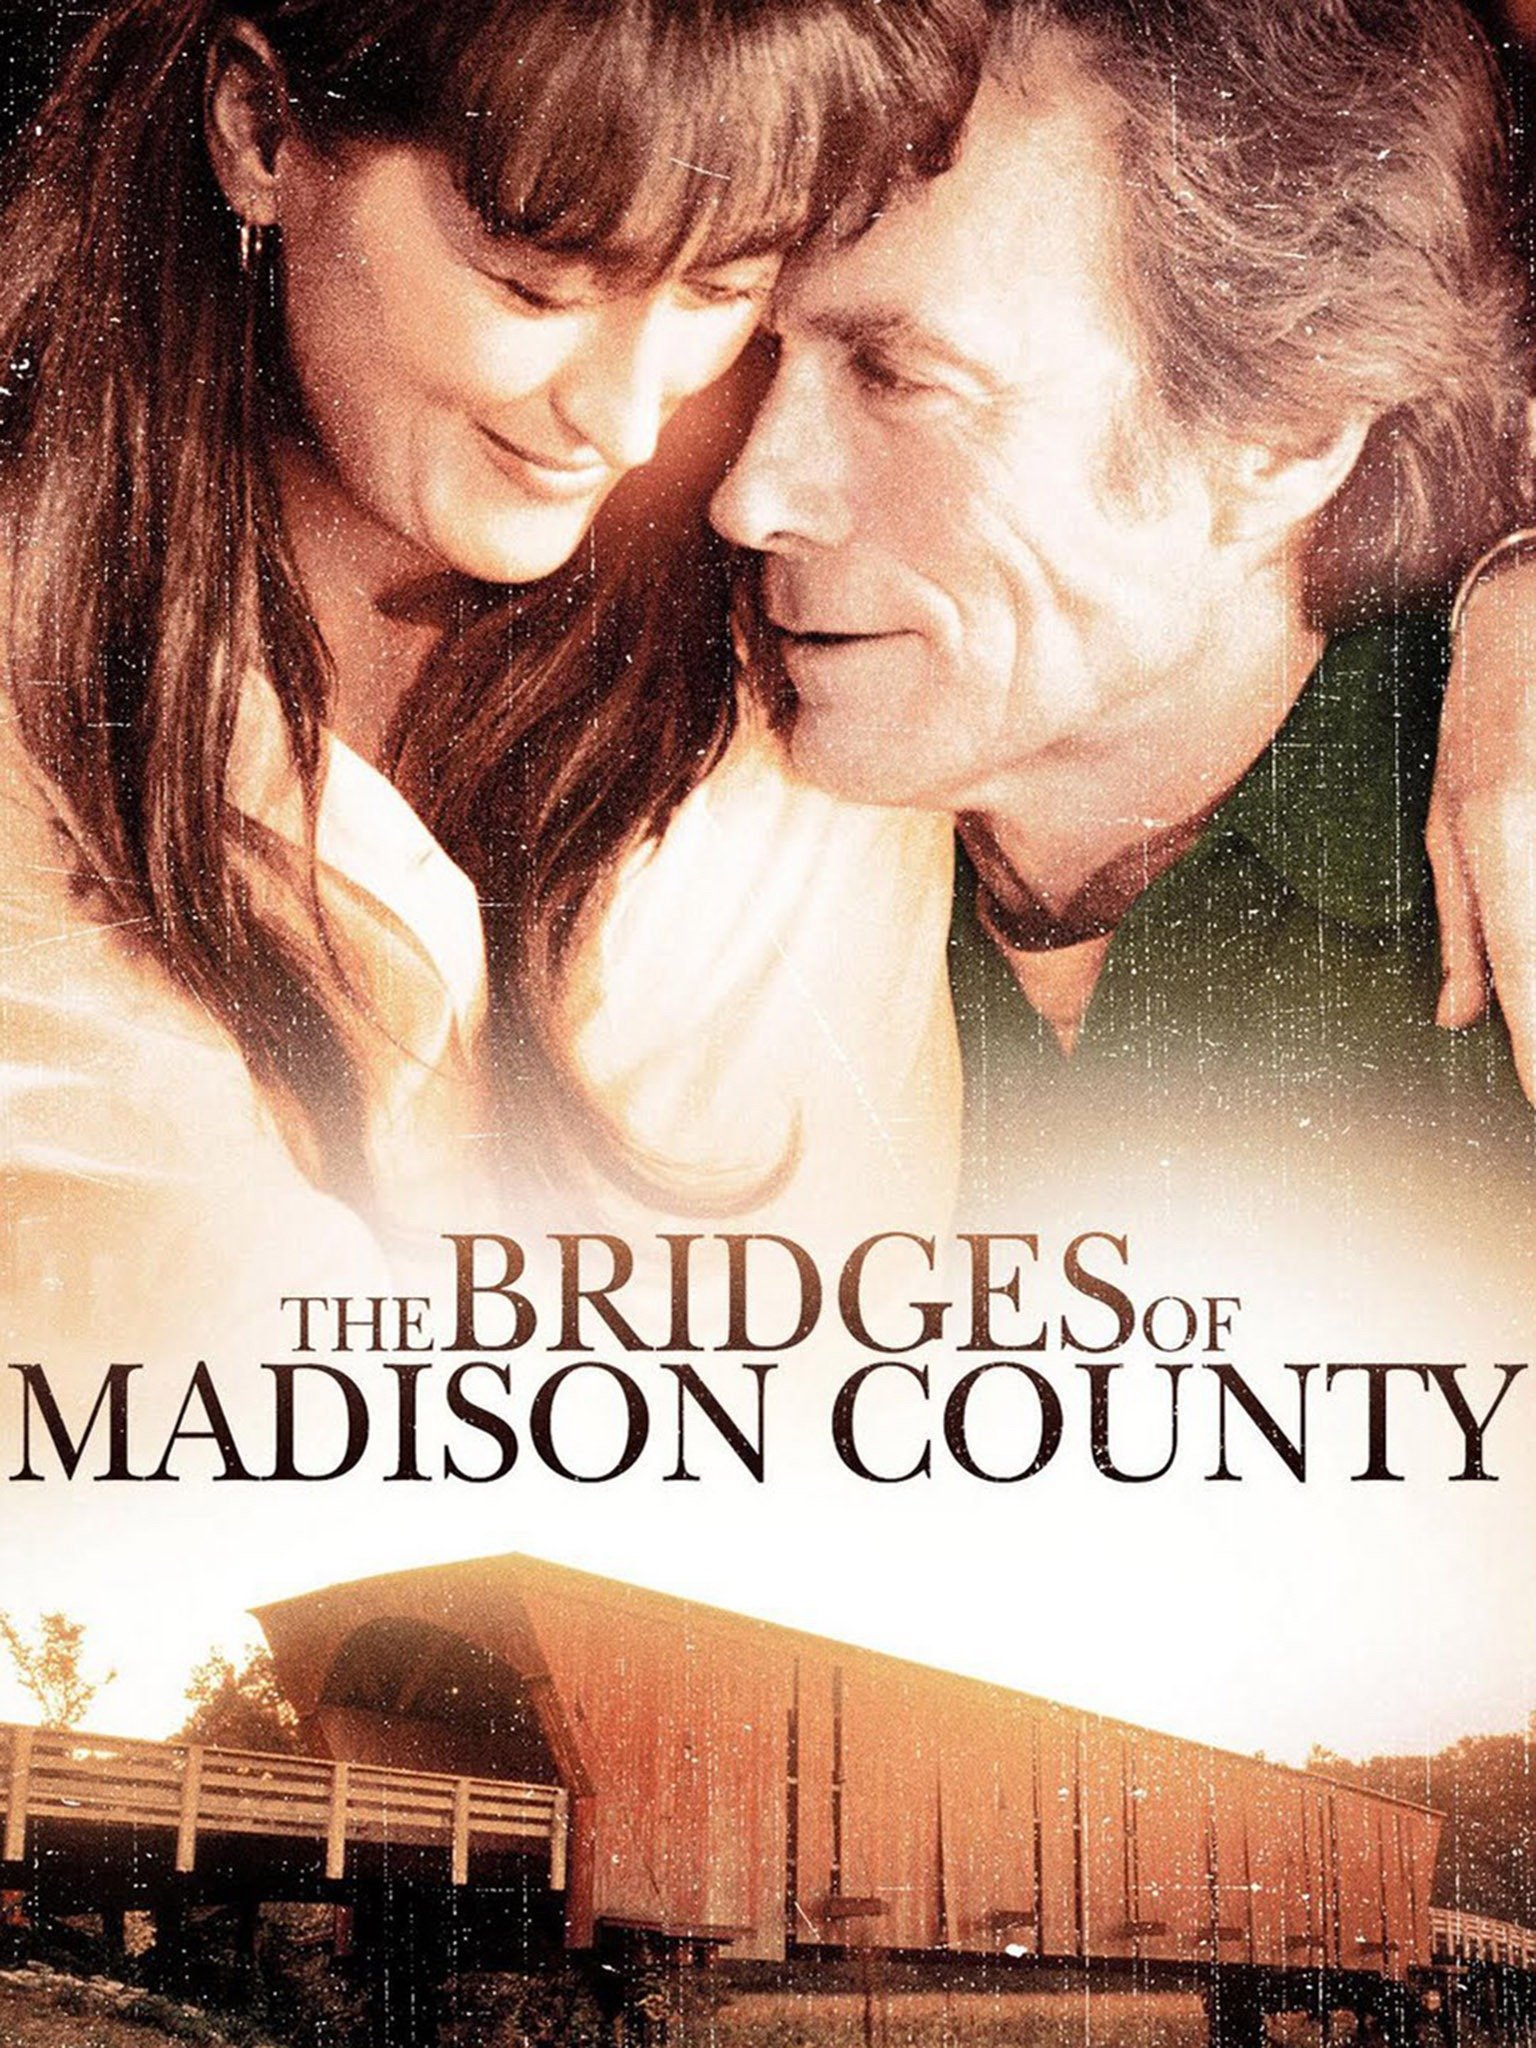 Streaming The Bridges Of Madison County 1995 Full Movies Online